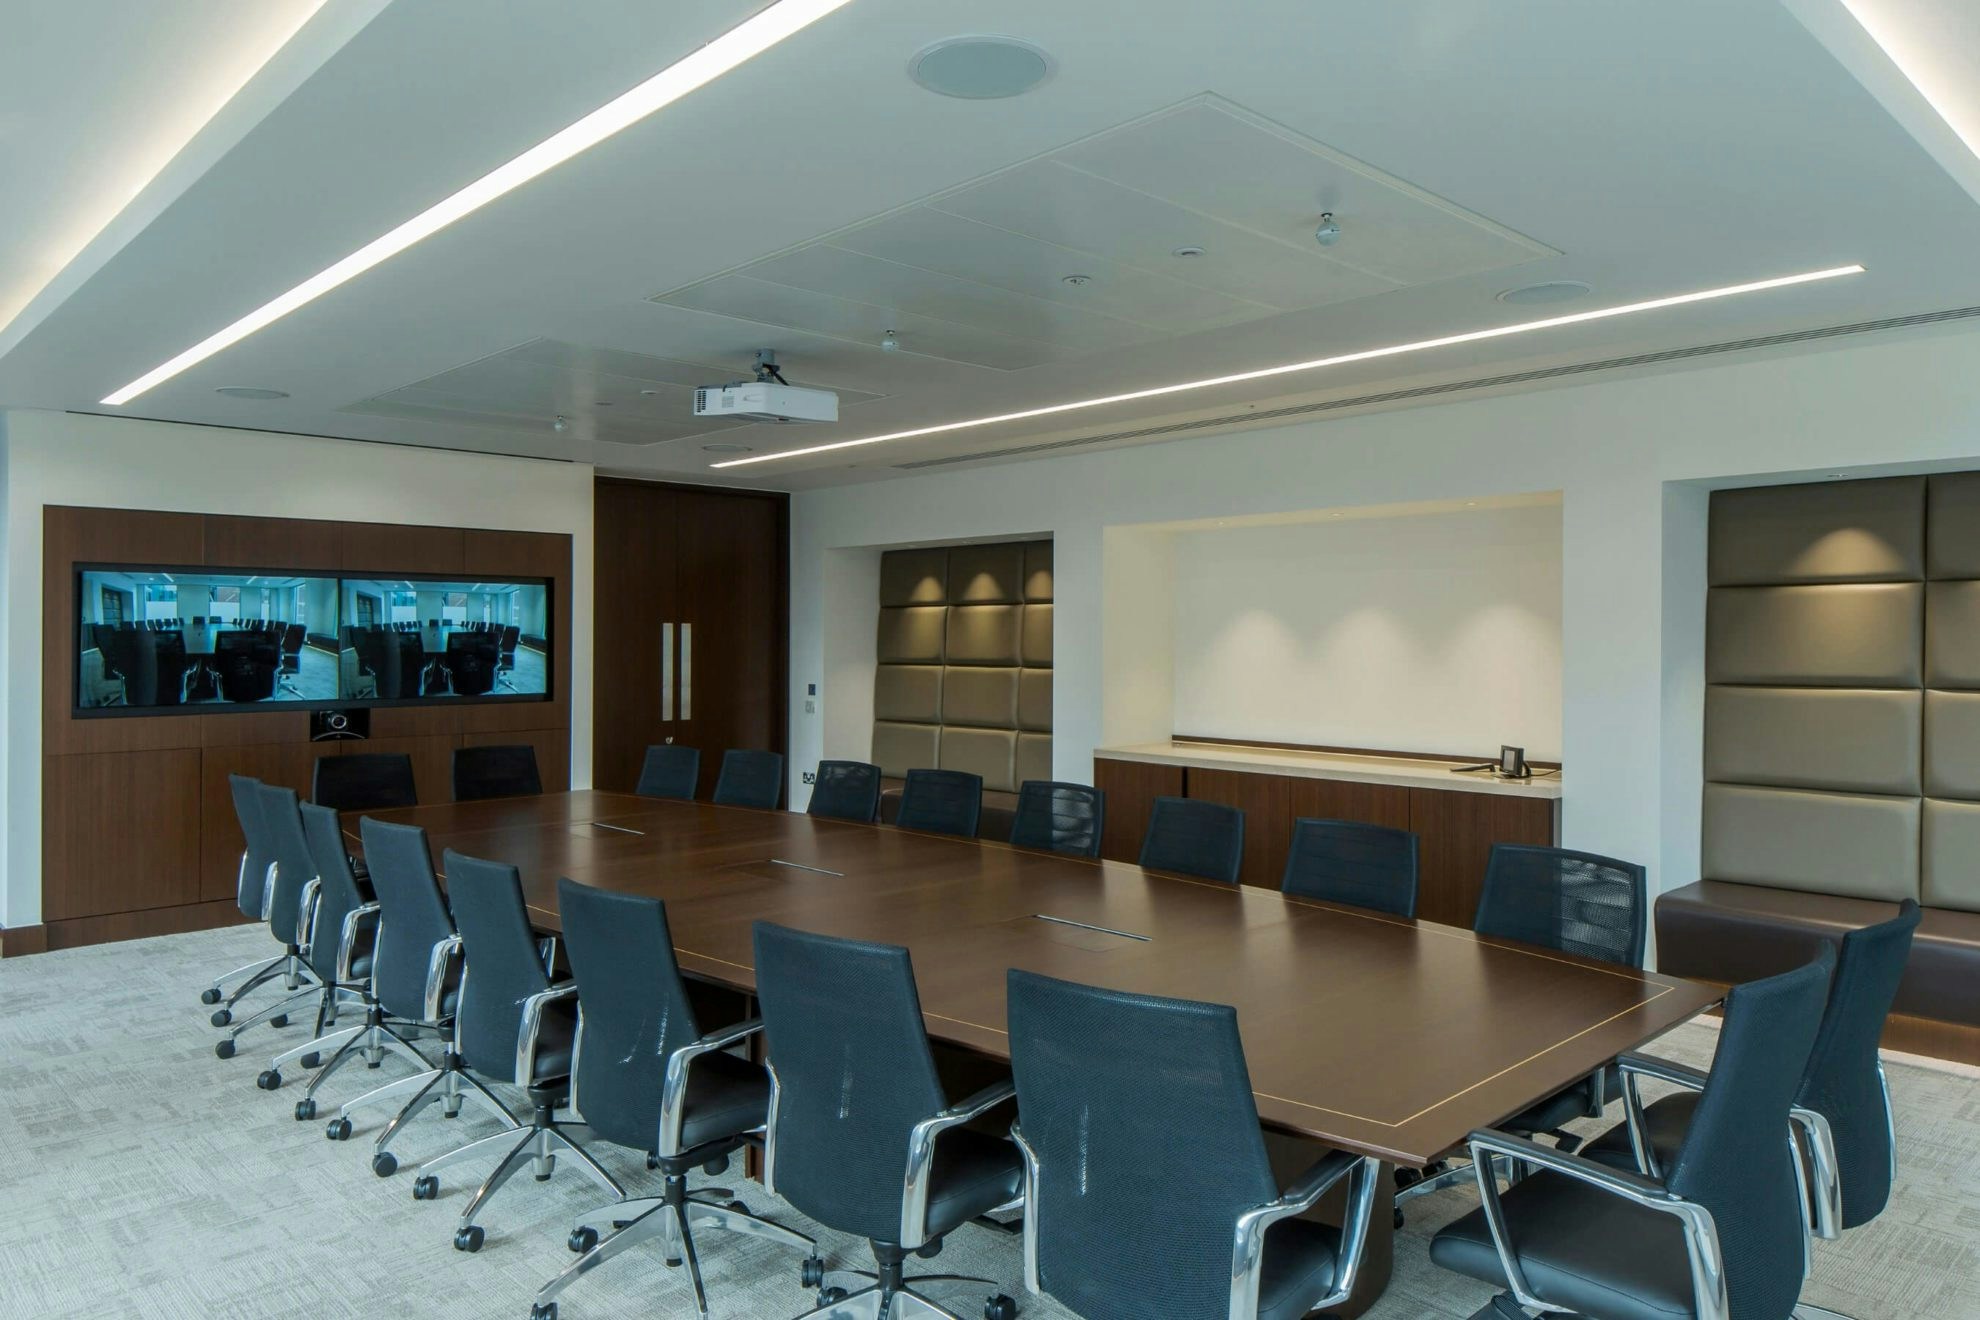 Boardroom with Padded Seats for Additional Capacity